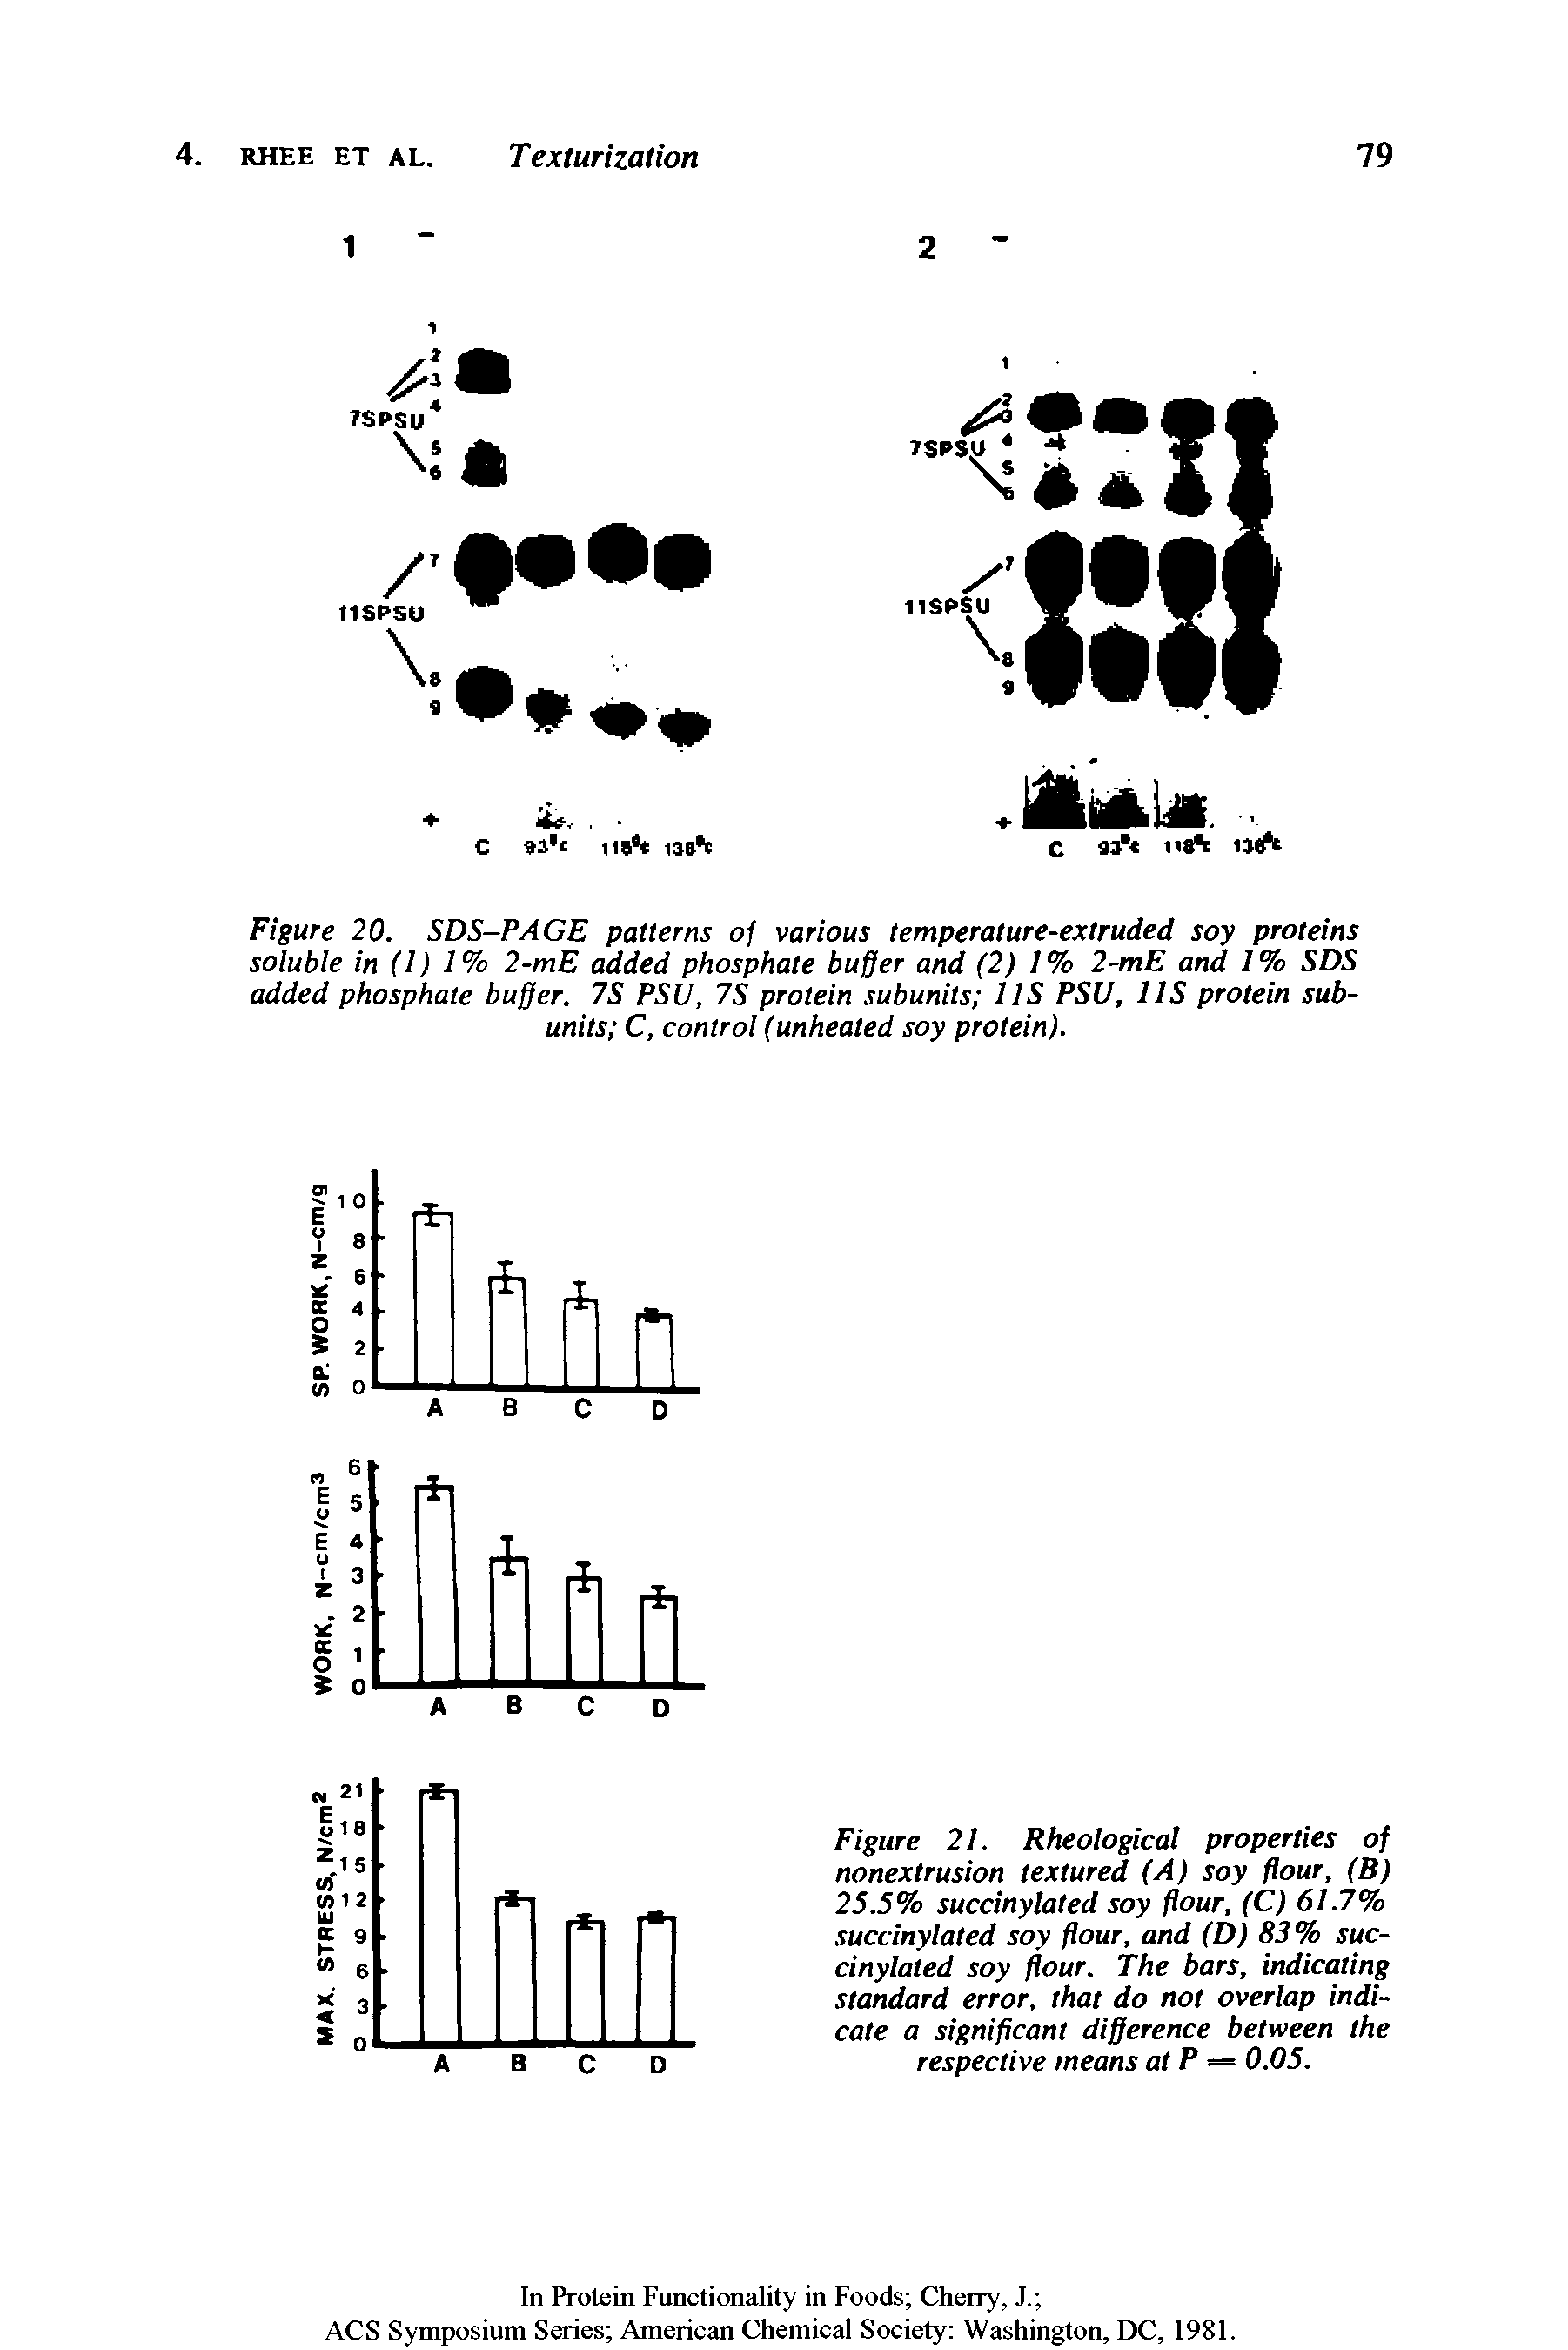 Figure 21. Rheological properties of nonextrusion textured (A) soy flour, (B) 25.5% succinylated soy flour, (C) 61.7% succinylated soy flour, and (D) 83% succinylated soy flour. The bars, indicating standard error, that do not overlap indicate a significant difference between the respective means atP 0.05.